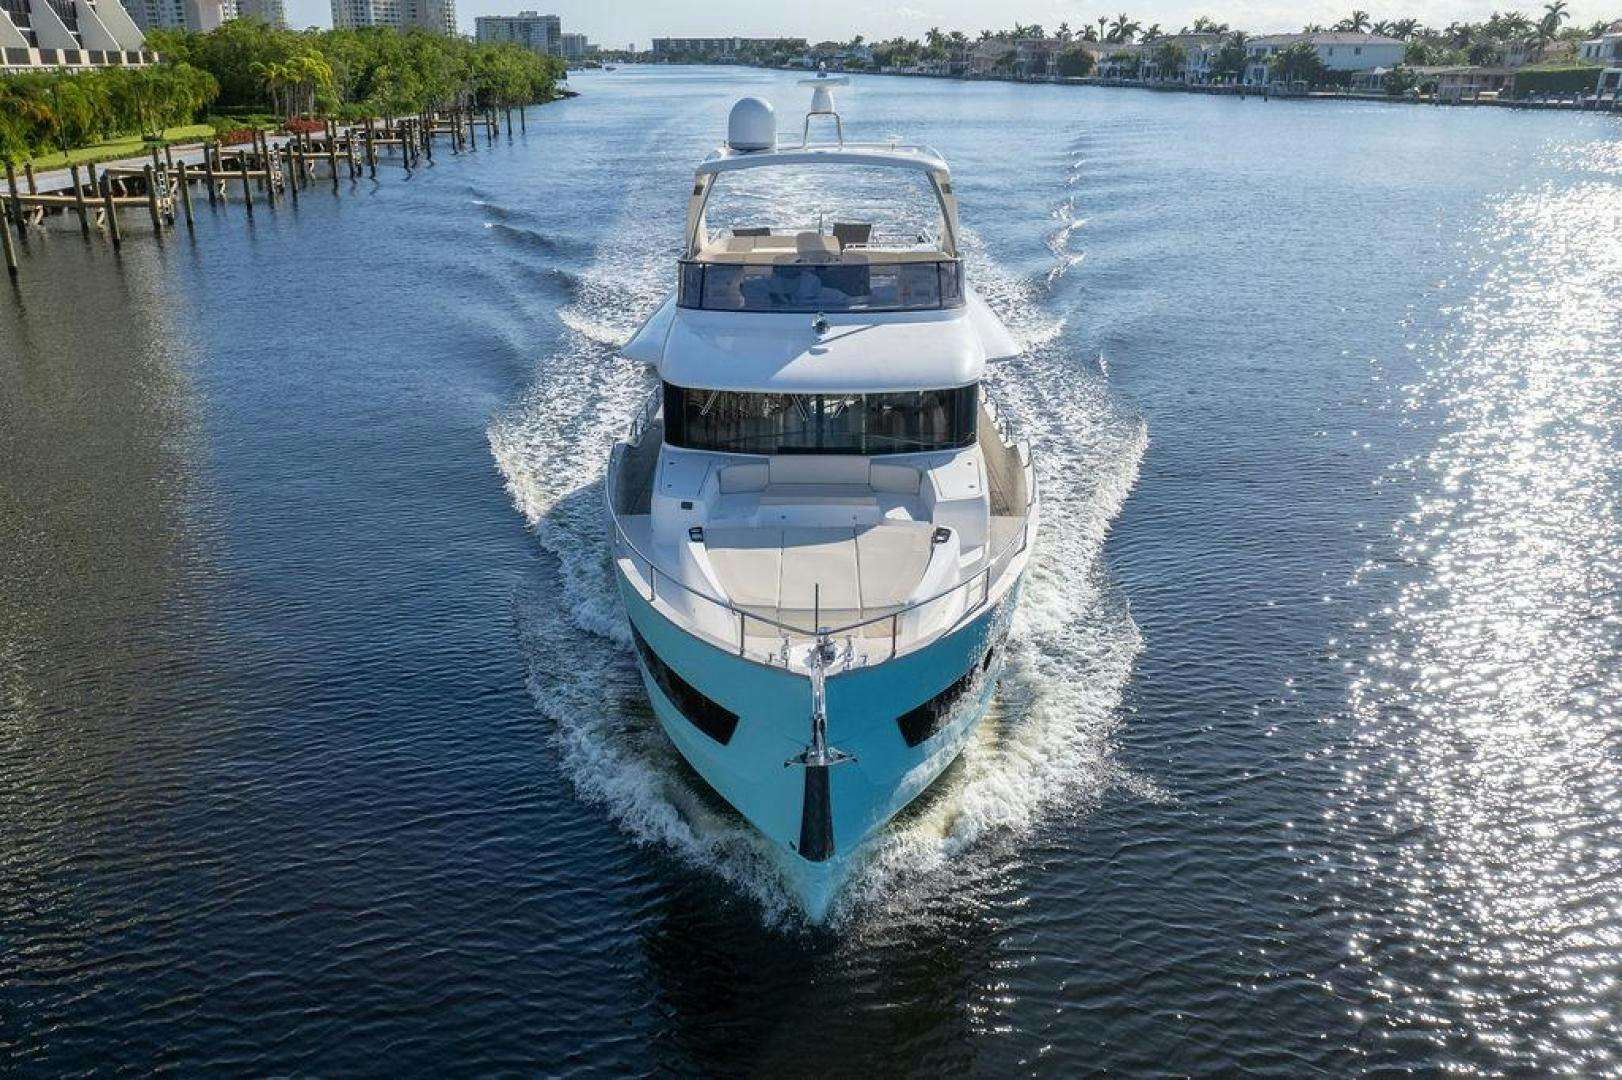 Forever young
Yacht for Sale